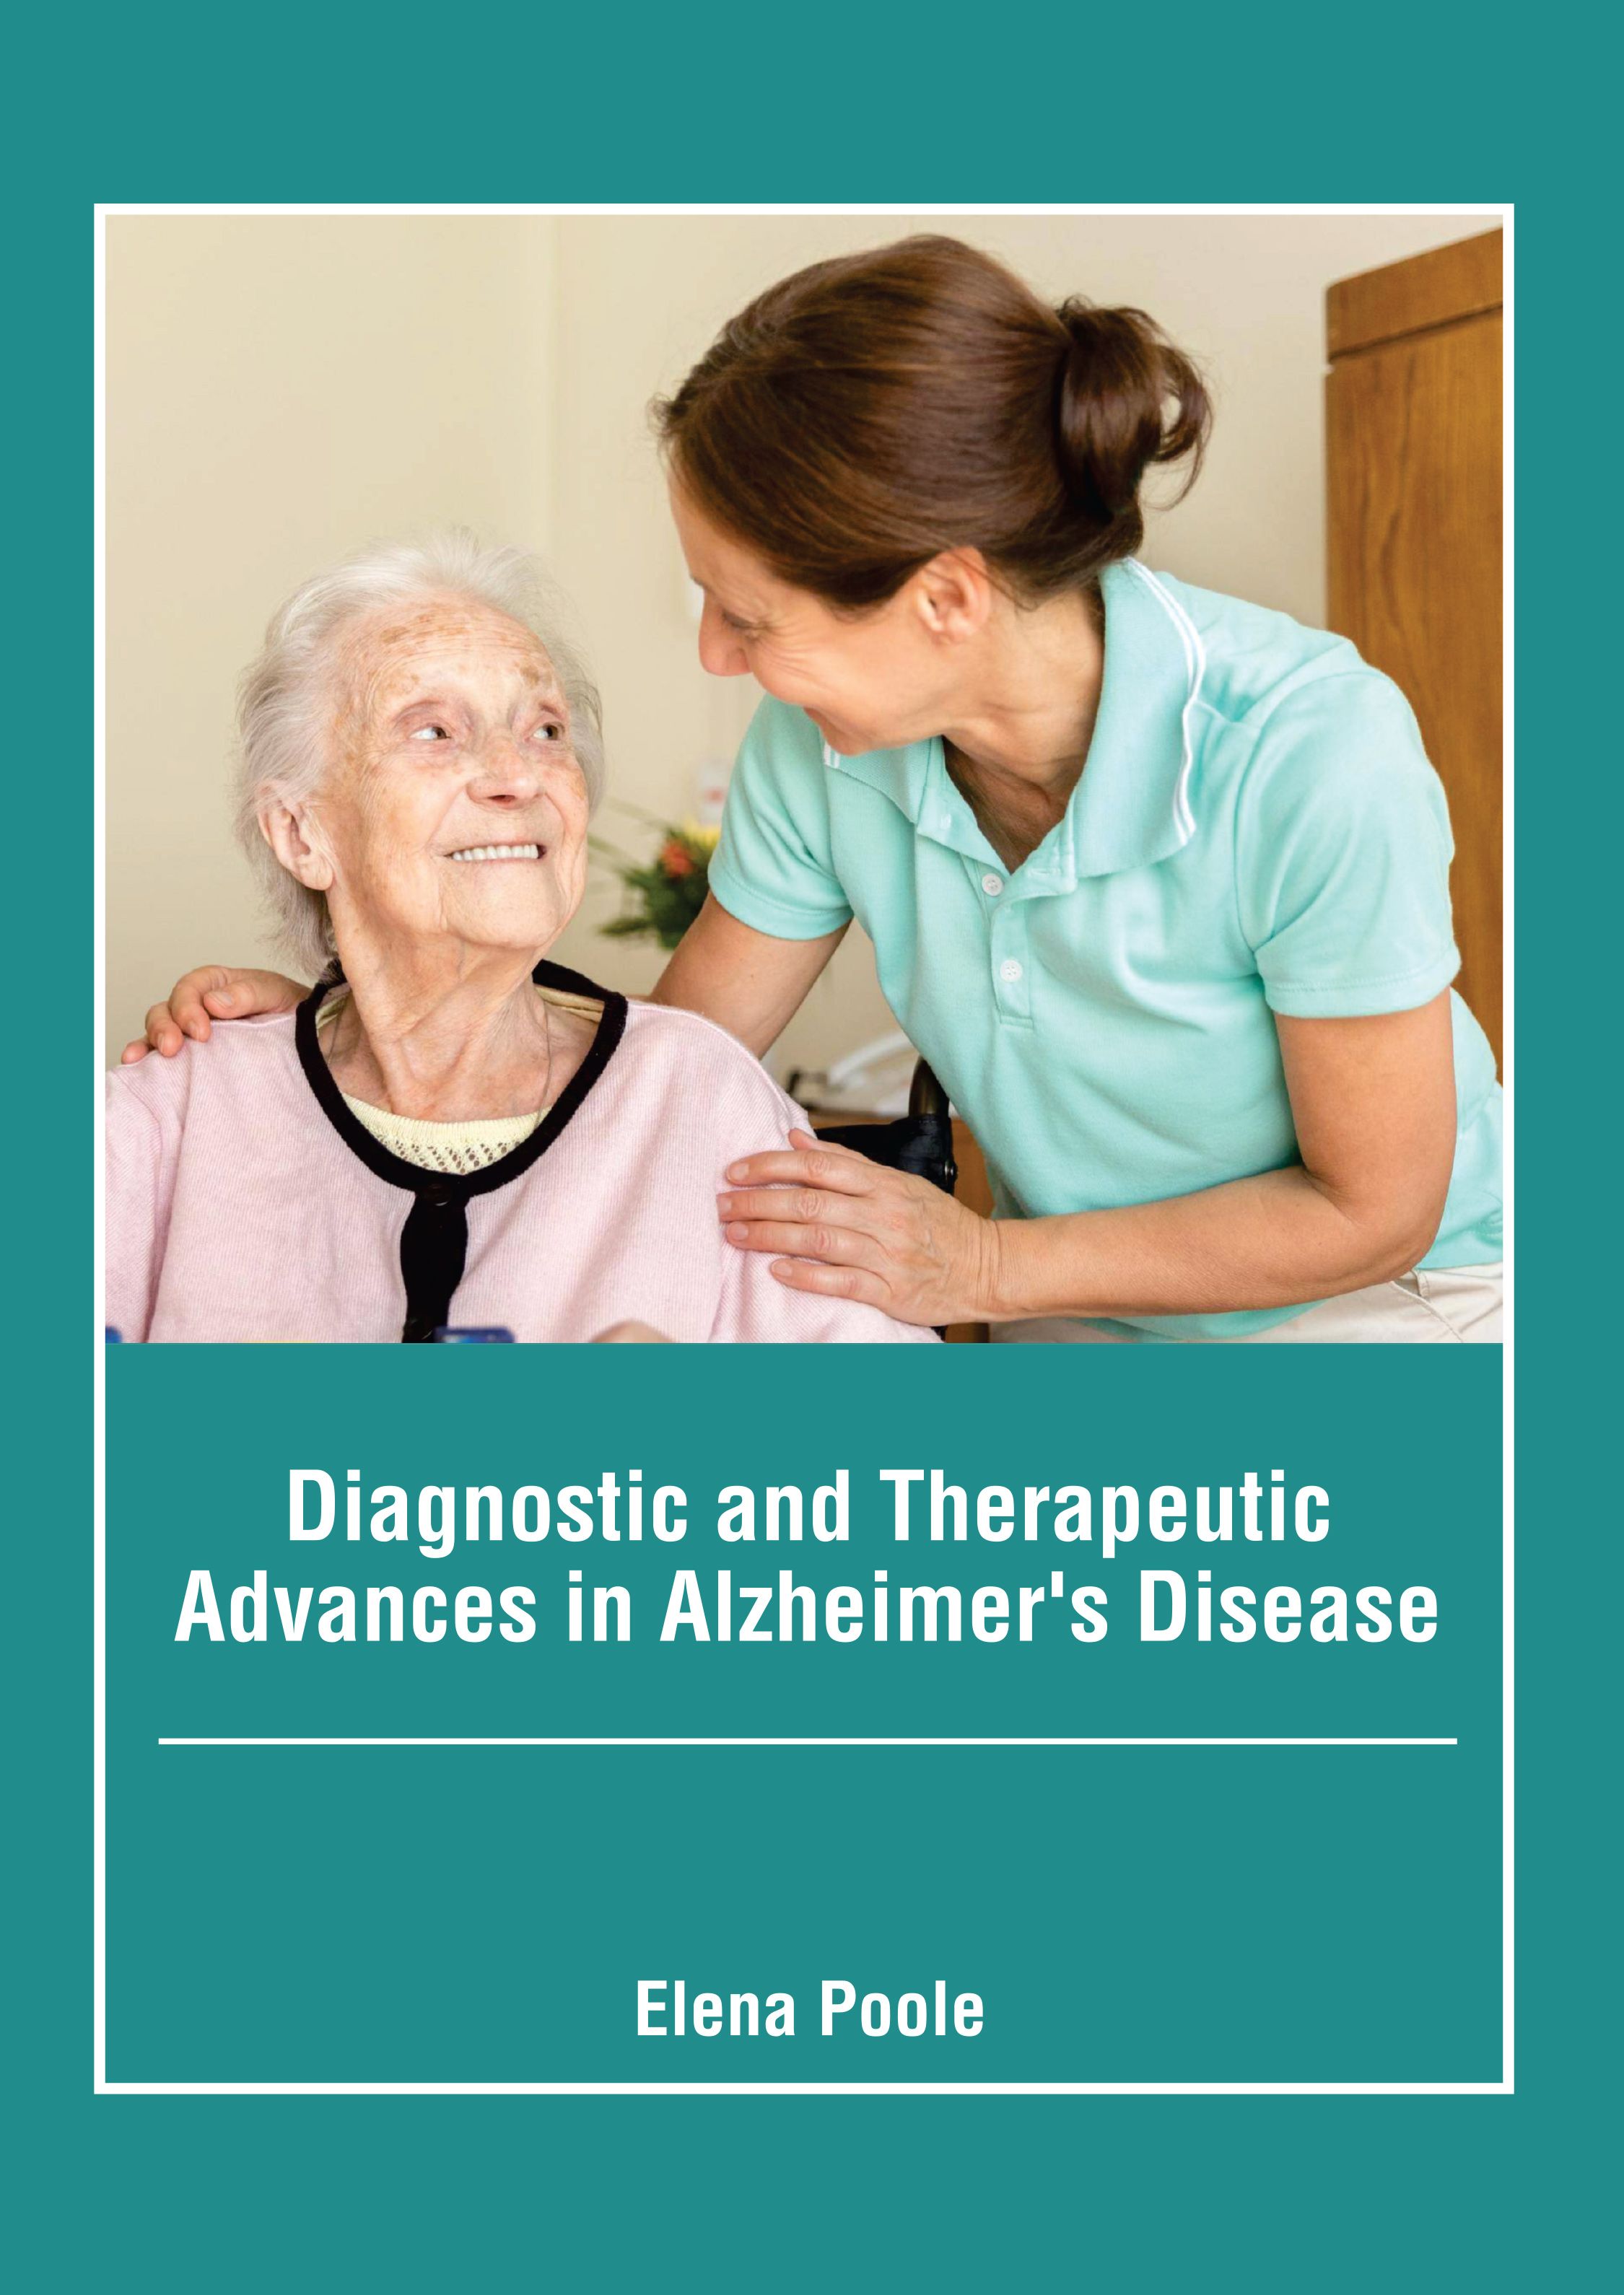 DIAGNOSTIC AND THERAPEUTIC ADVANCES IN ALZHEIMER'S DISEASE